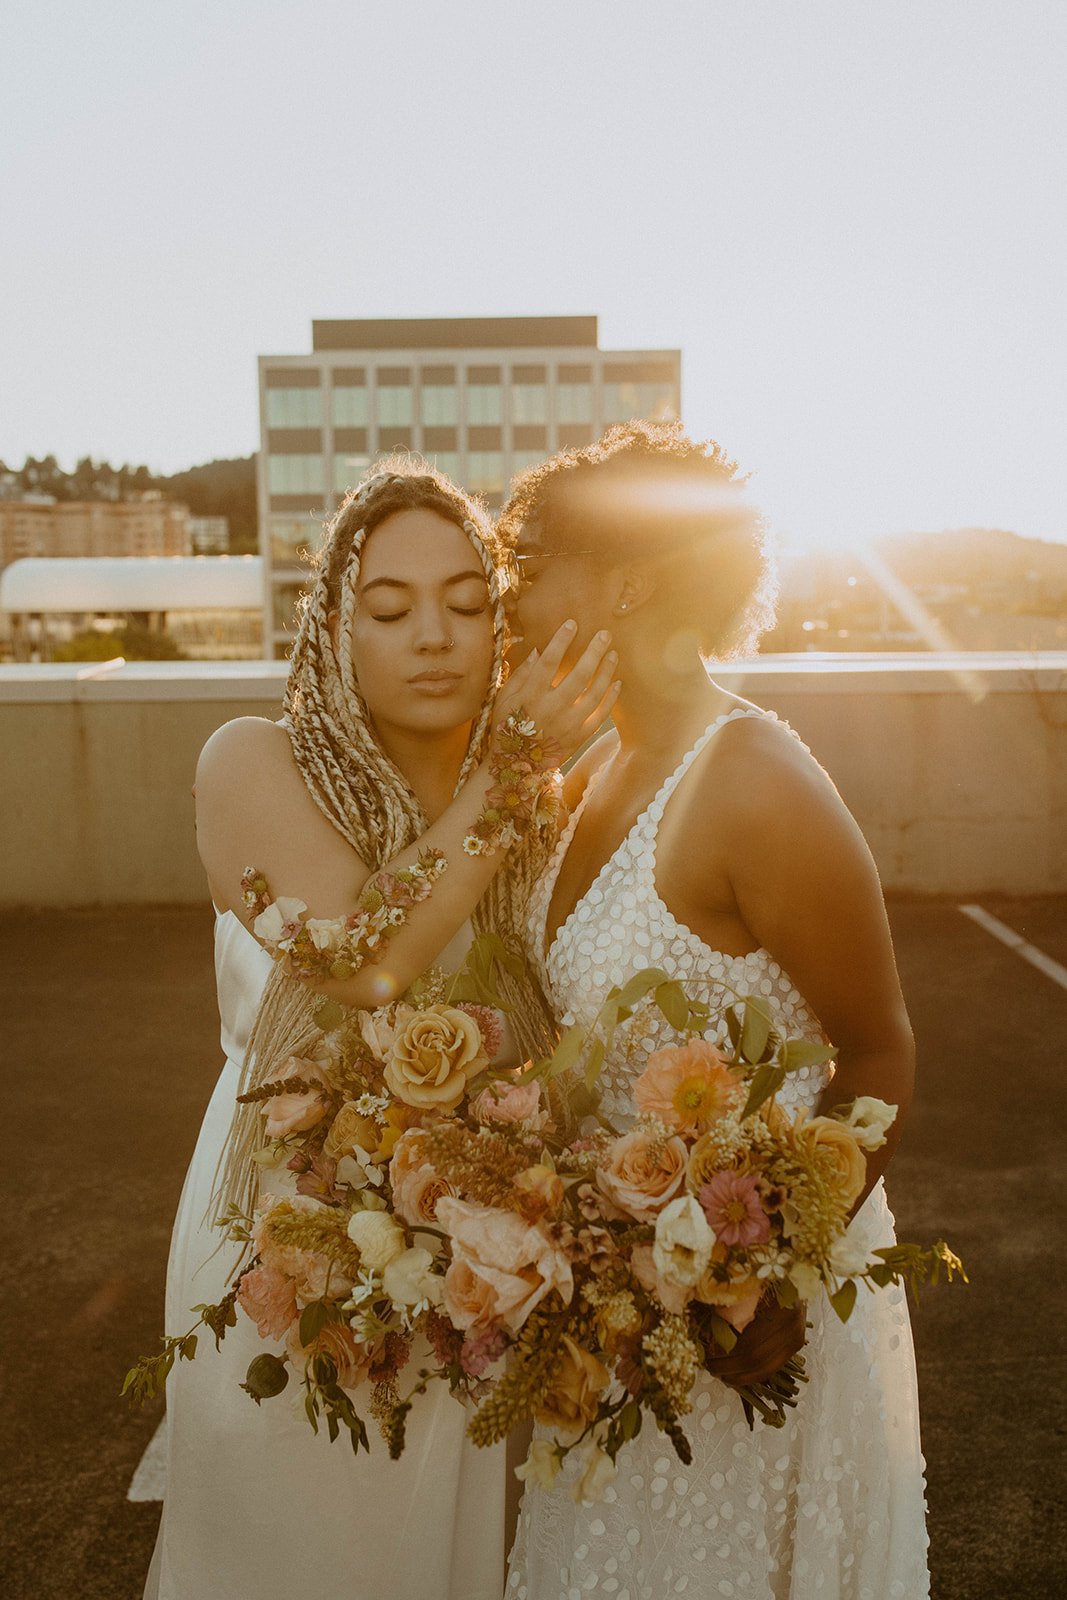 lgbtq+ wedding inspiration featuring made with love and the label wedding dresses